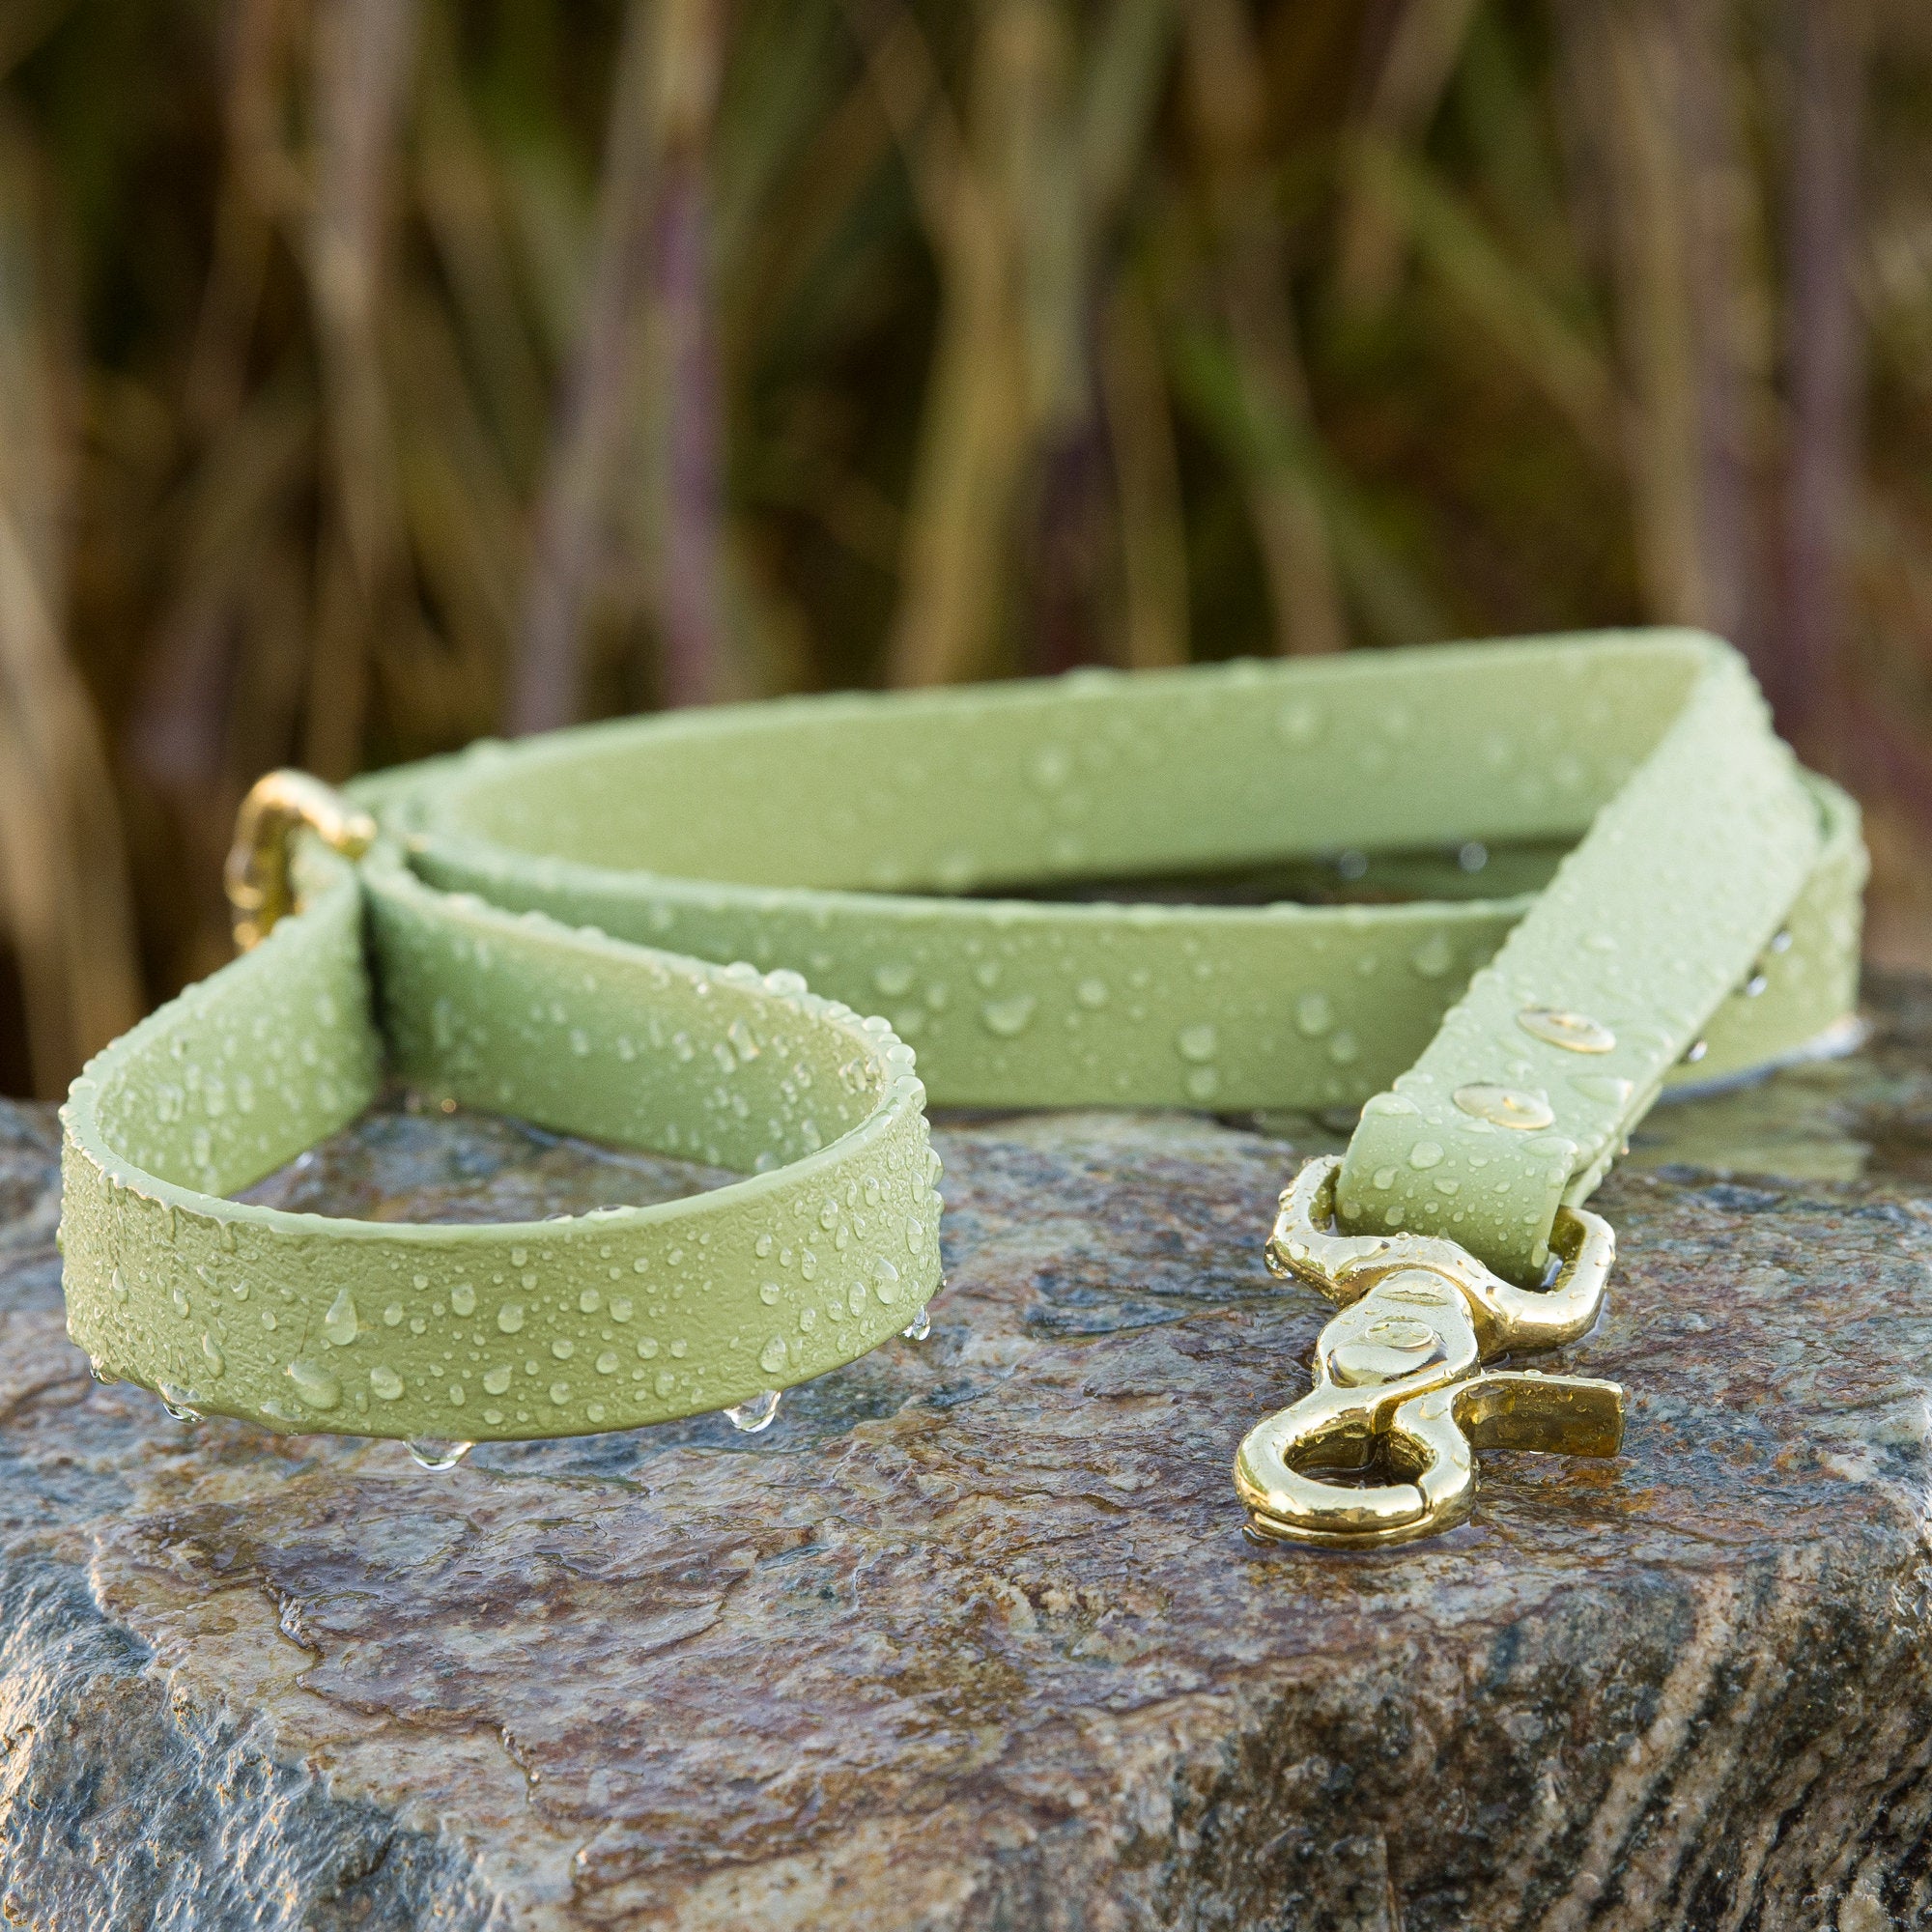 biothane leash in Matcha color with brass hardware